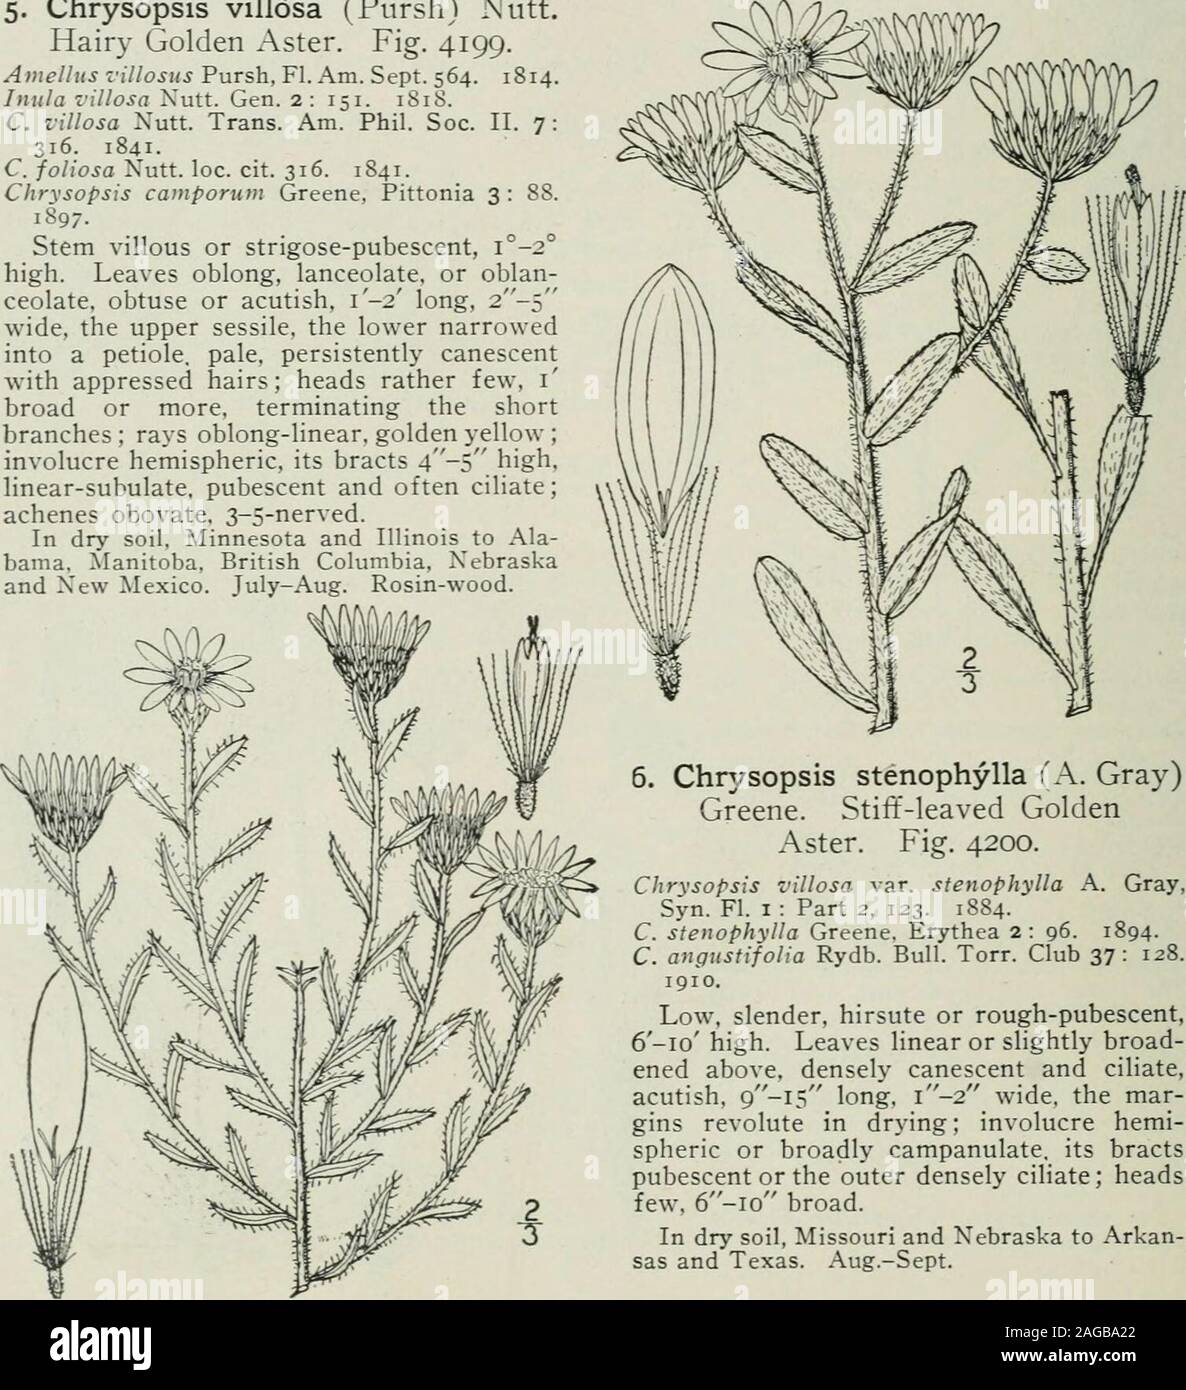 . An illustrated flora of the northern United States, Canada and the British possessions : from Newfoundland to the parallel of the southern boundary of Virginia and from the Atlantic Ocean westward to the 102nd meridian. racts 4-5 high,linear-subulate, pubescent and often ciliate;achenes obovate, 3-5-nerved. In dry soil, Minnesota and Illinois to Ala-bama, ^lanitoba, British Columbia, Nebraskaand New Mexico. July-Aug. Rosin-wood. Vol. III. 4. Chrysopsis mariana (L.) Ell. ]lar3-land Golden Aster. Fig. 4198. Inula mariana L. Sp. PL Ed. 2, 1240. 1763./. mariana Nutt. Gen. 2: 151. 1818.C. marian Stock Photo